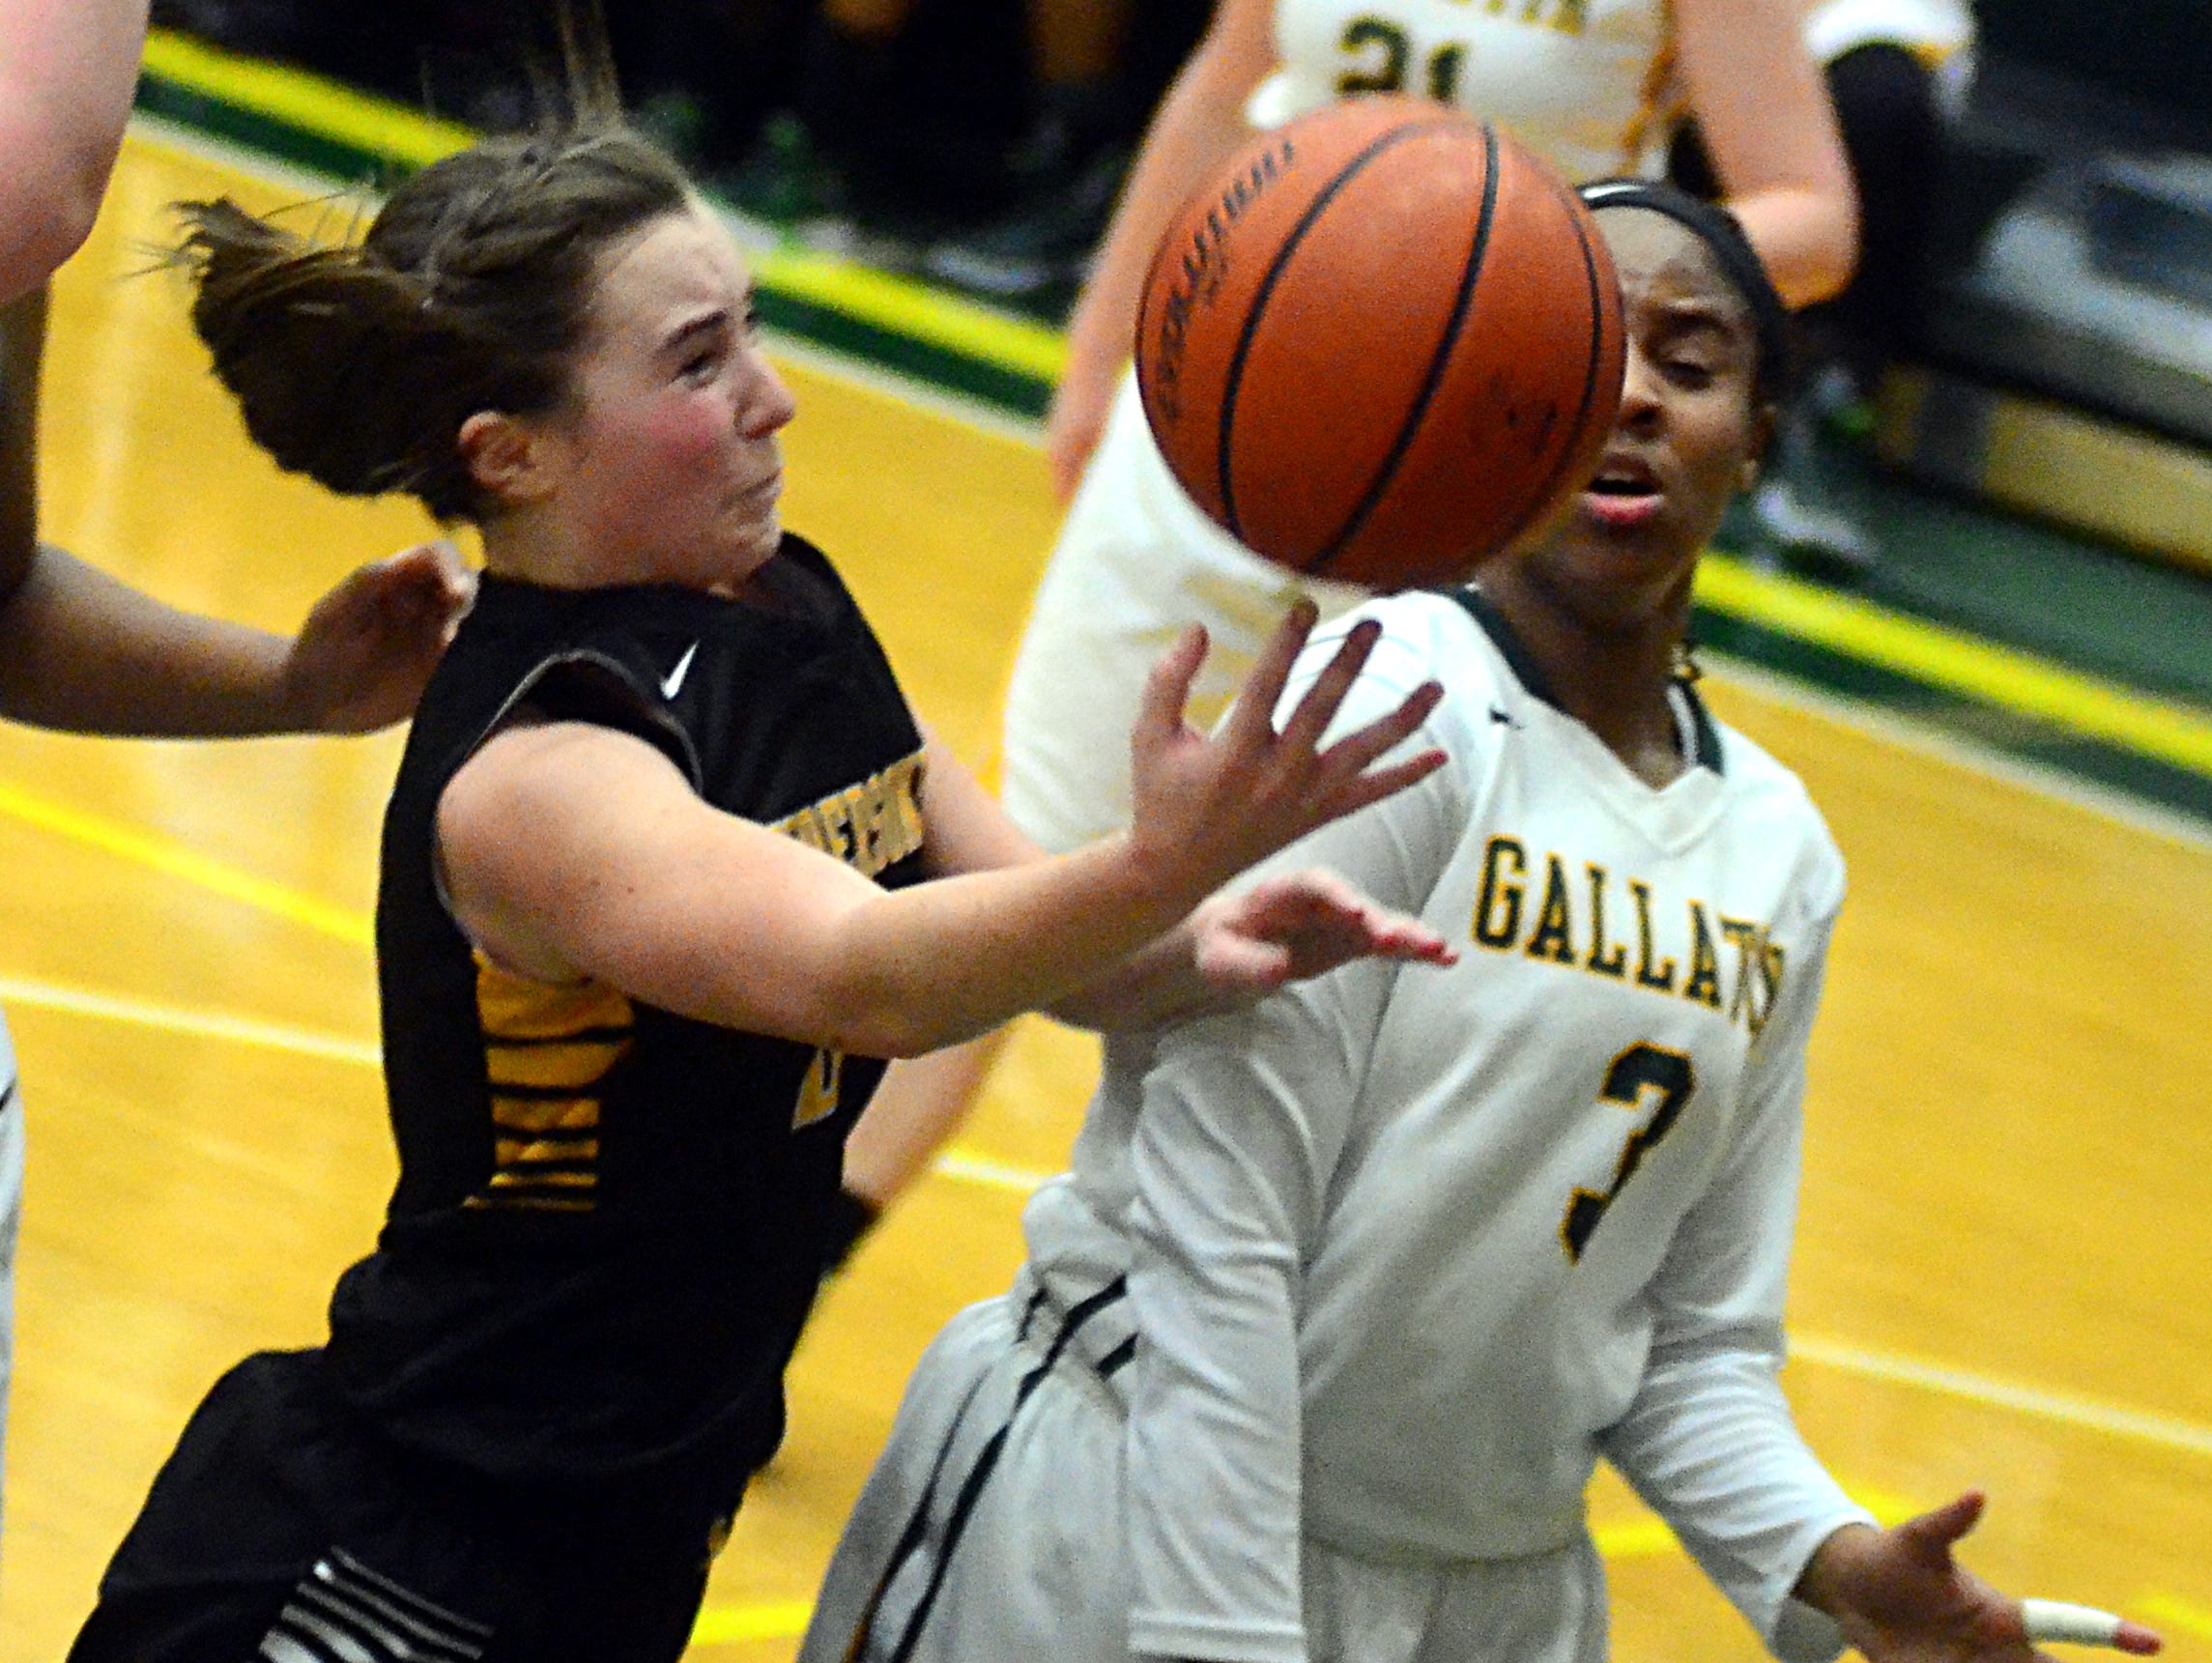 Hendersonville High senior point guard Carleigh Short releases an interior shot as Gallatin senior Rene Hudson defends during second-quarter action. Short scored 22 points in the Lady Commandos’ 53-47 victory on Tuesday evening.